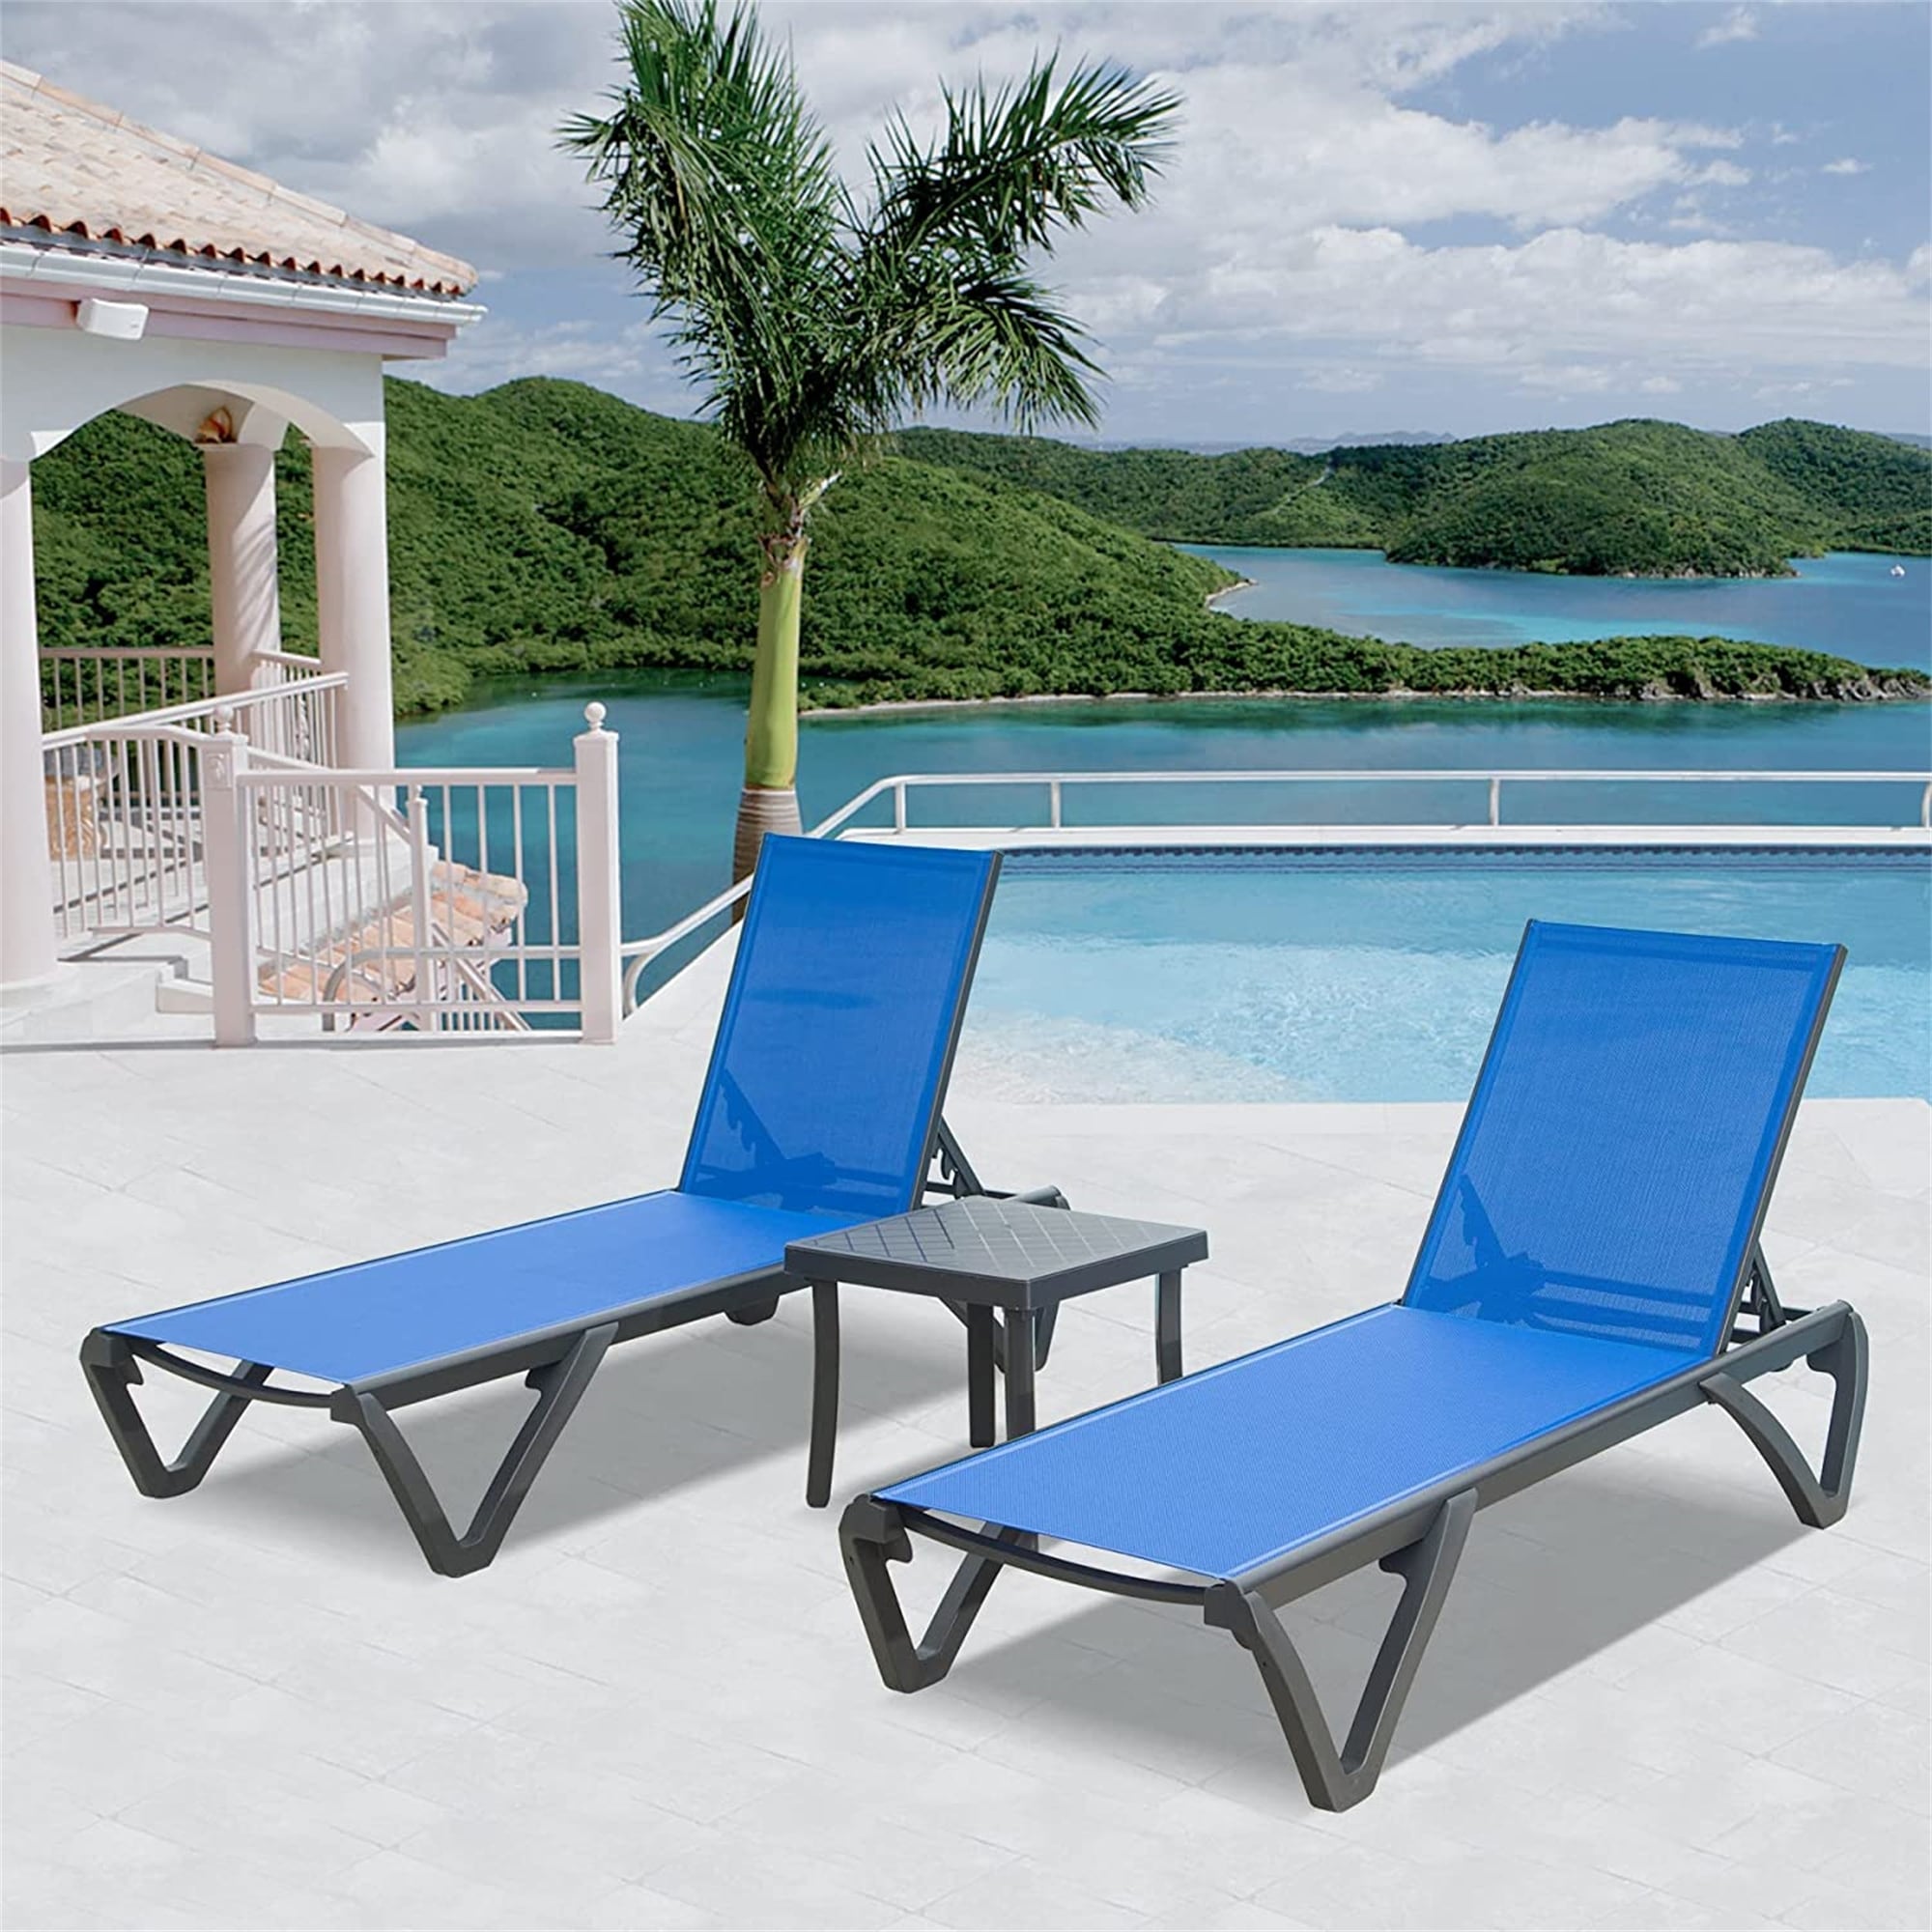 Patio Chaise Lounge Chair Set 2 Pieces Aluminum Polypropylene Sunbathing Chair With 5 Adjustable Position + 1 Side Table